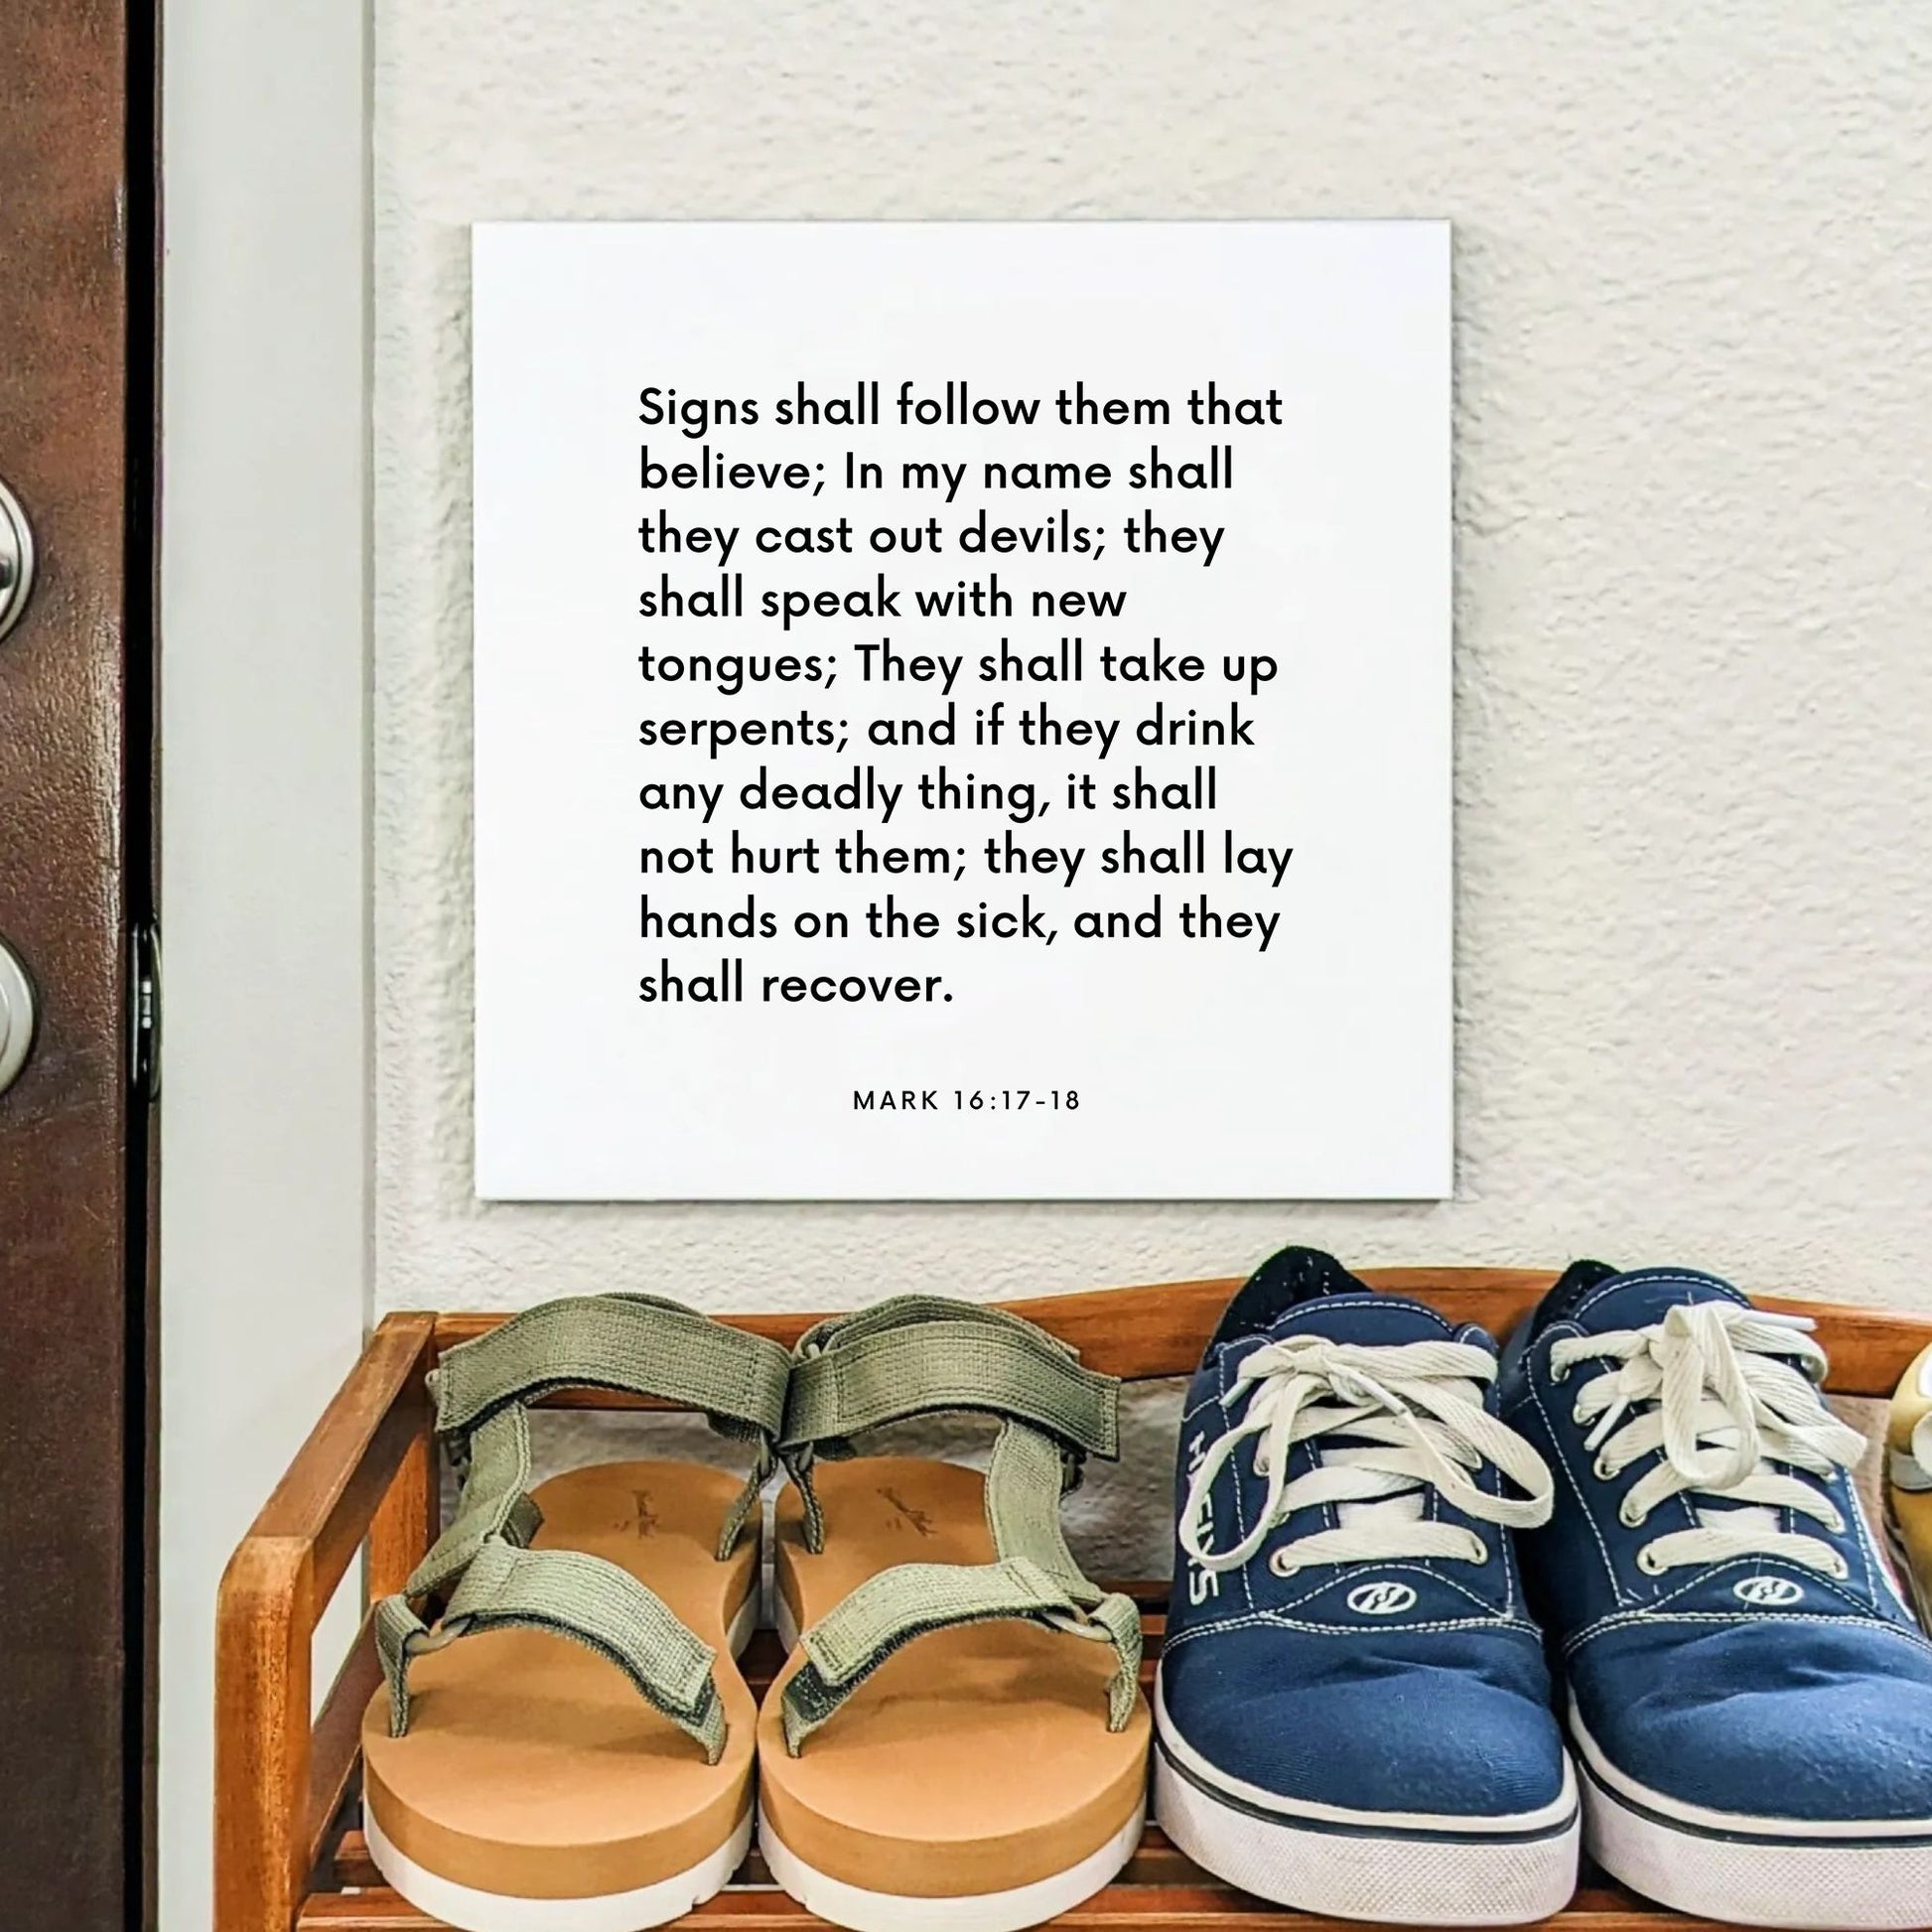 Shoes mouting of the scripture tile for Mark 16:17-18 - "Signs shall follow them that believe"